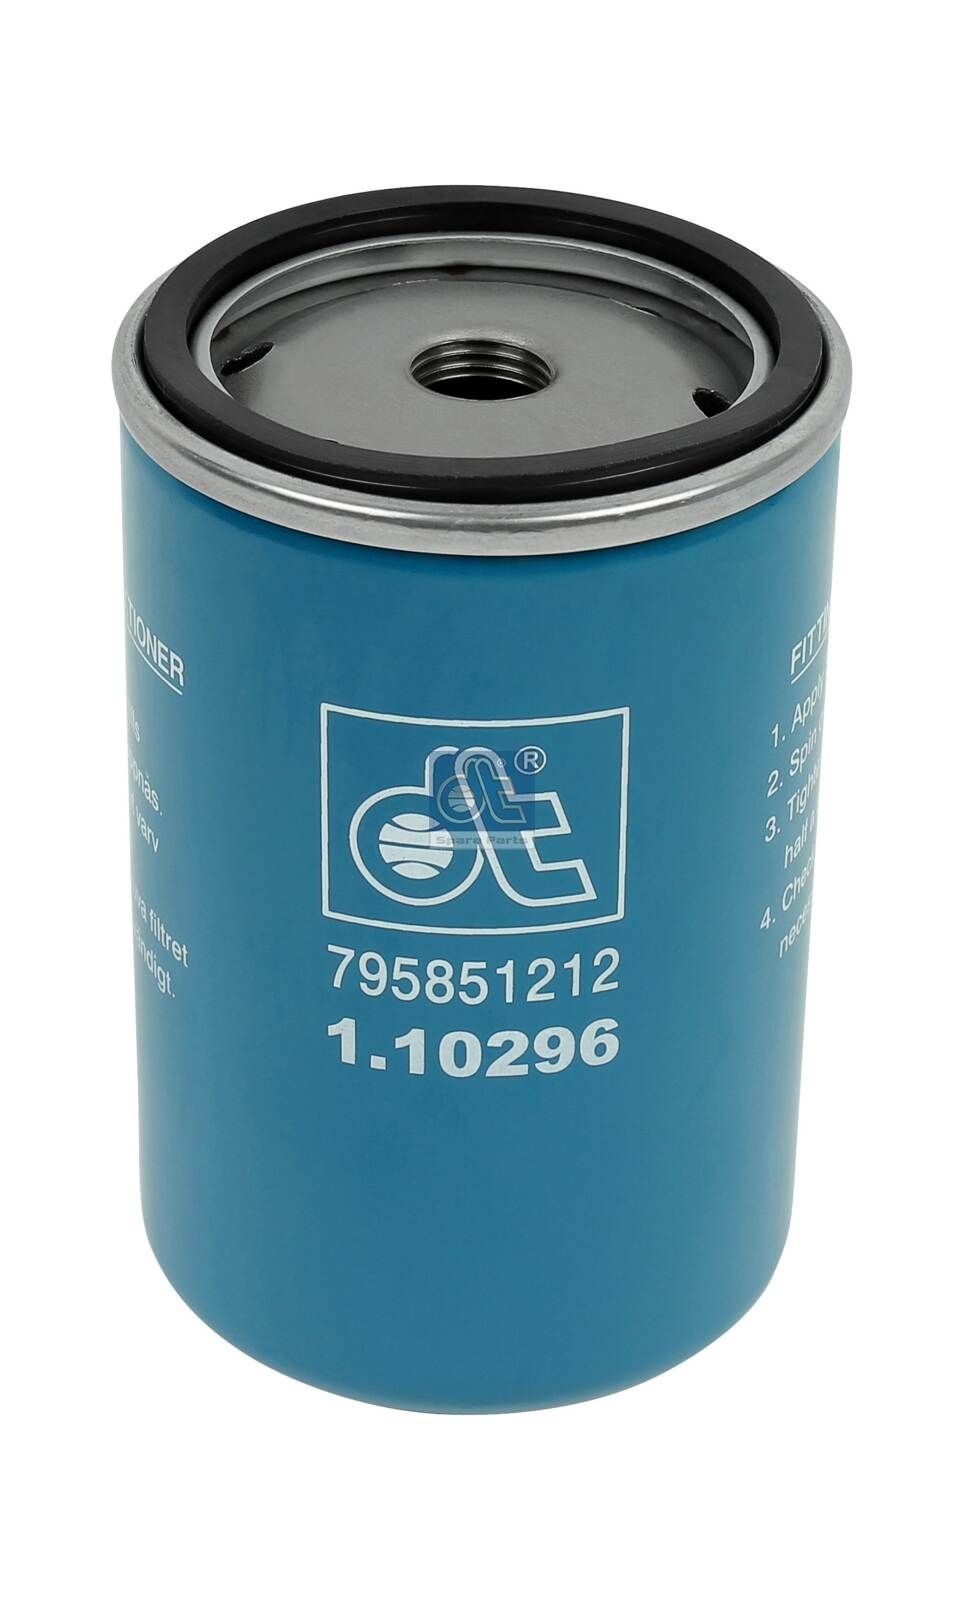 WK 723/1 DT Spare Parts 1.10296 Fuel filter 0118 0597